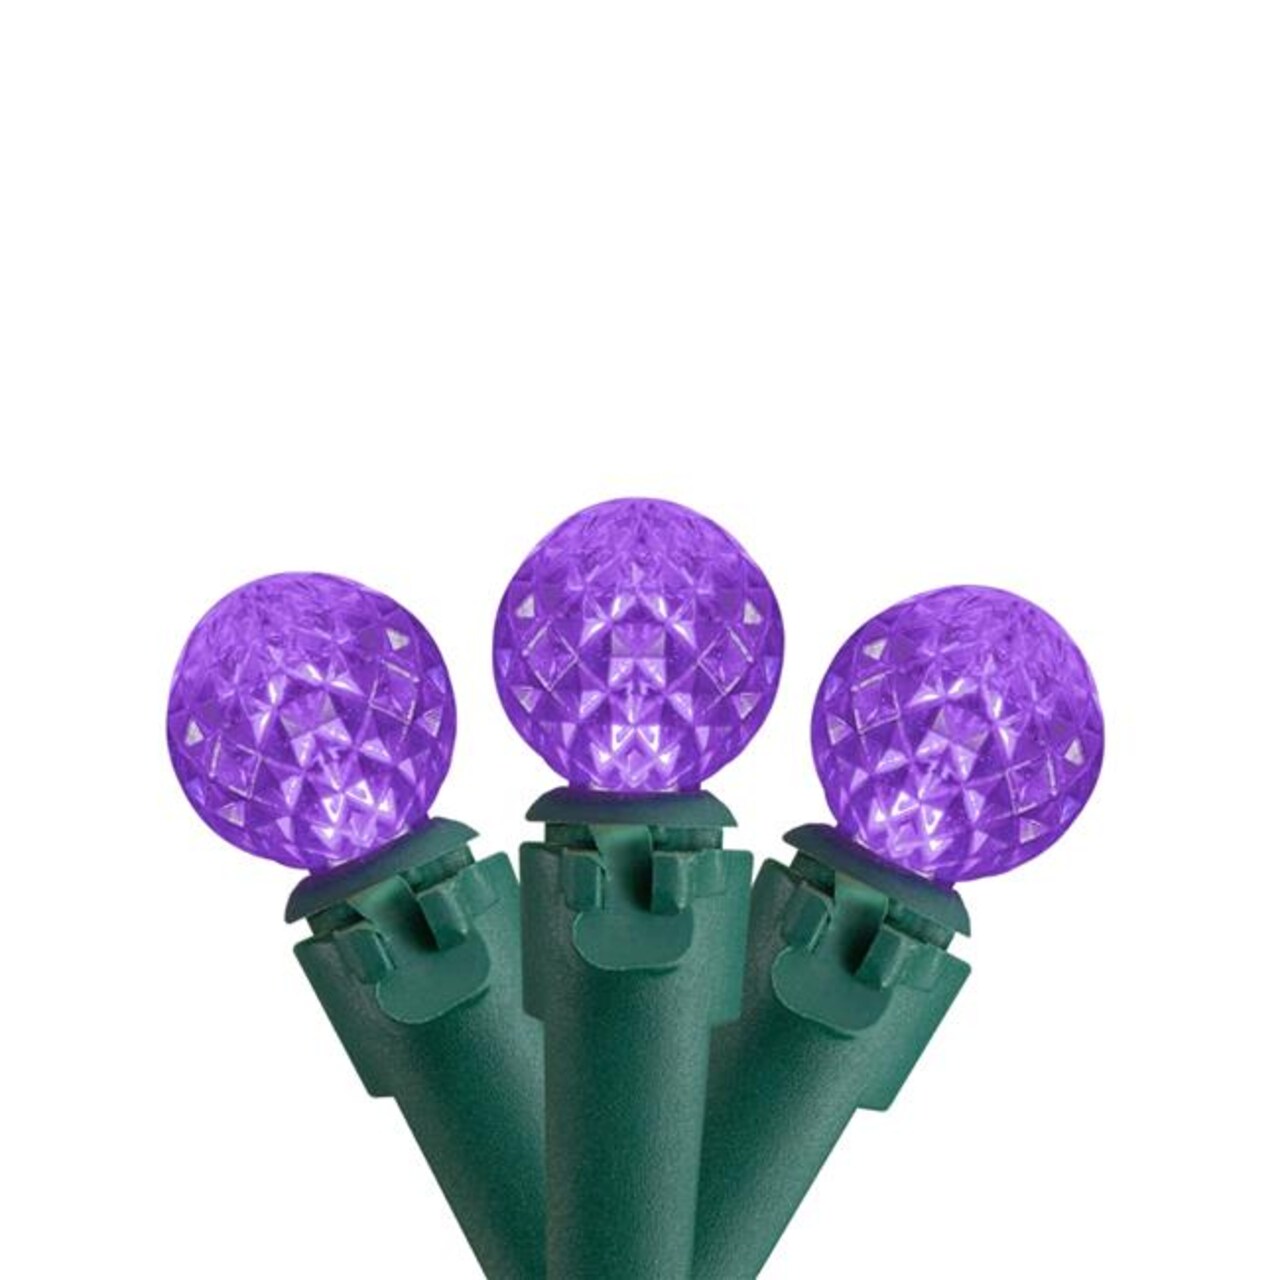 Northlight 34619176 15.9 ft. LED G12 Berry Christmas Lights with Green Wire, Purple - 50 Count